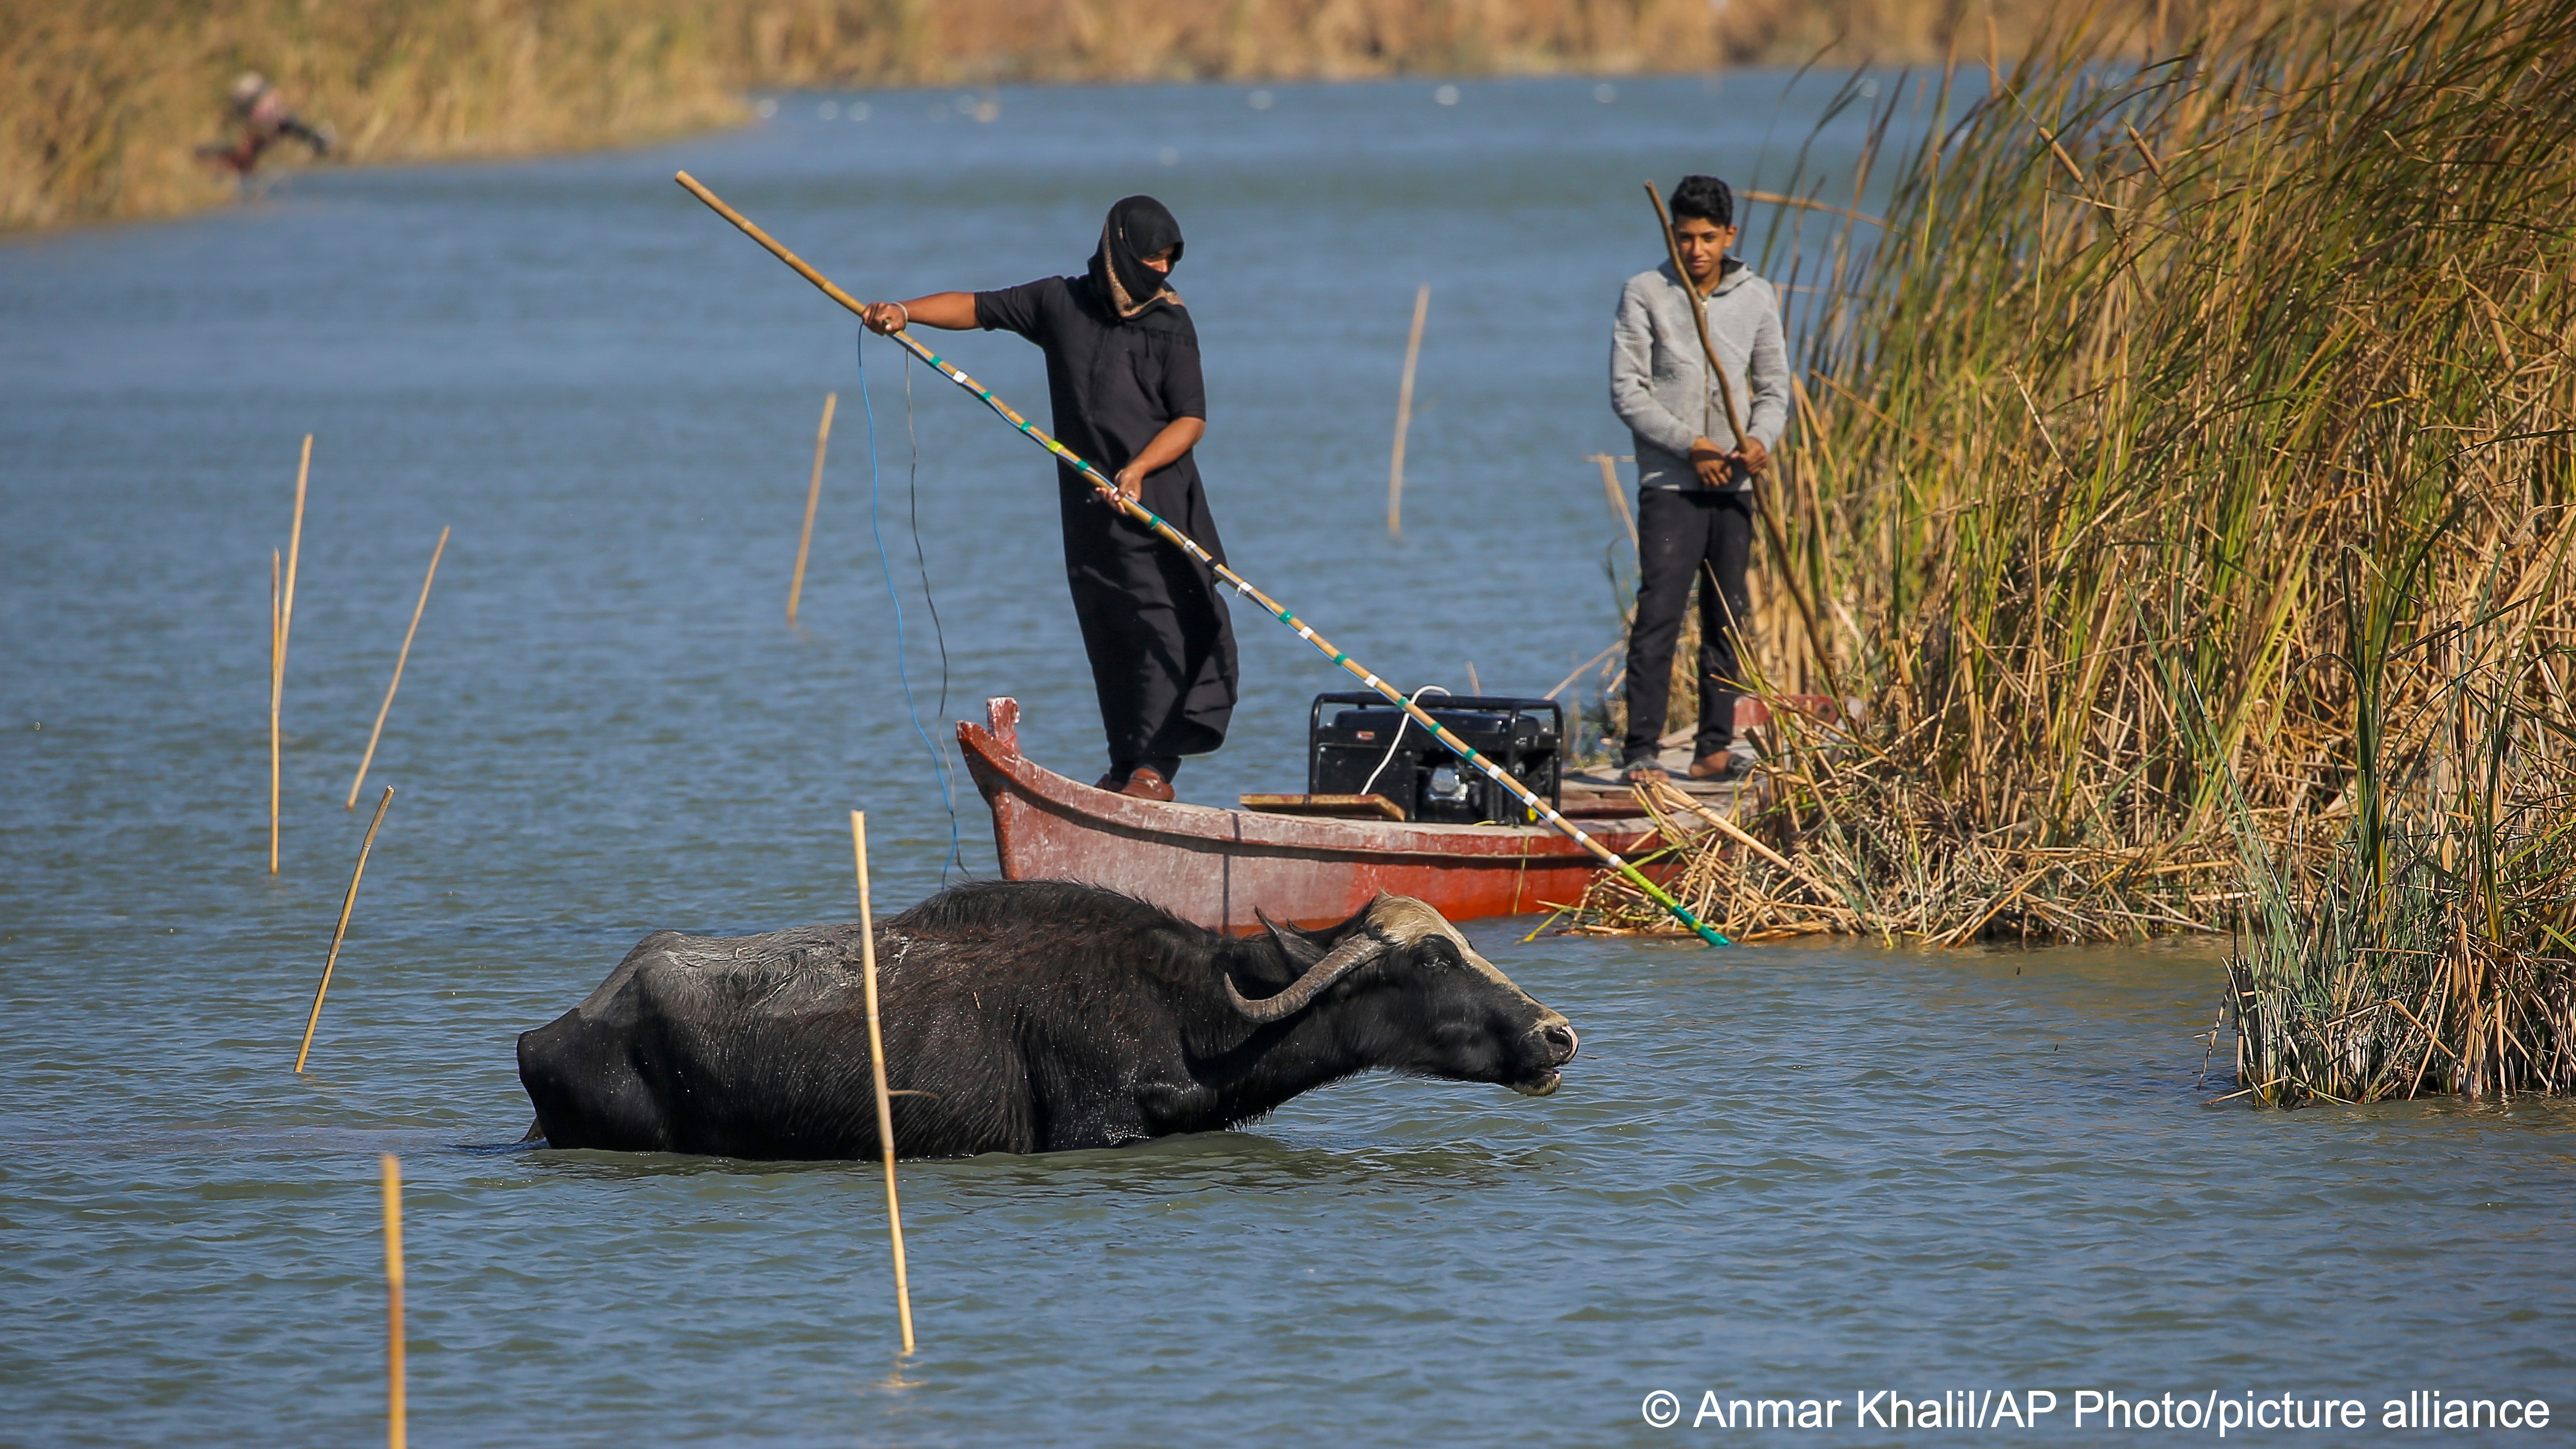 Iraqi buffalo herders gather reeds in the marshes of Chibayish while a water buffalo drinks water in the river, Dhi Qar Governate, southern Iraq (photo: Anmar Khalil/picture alliance/AP)